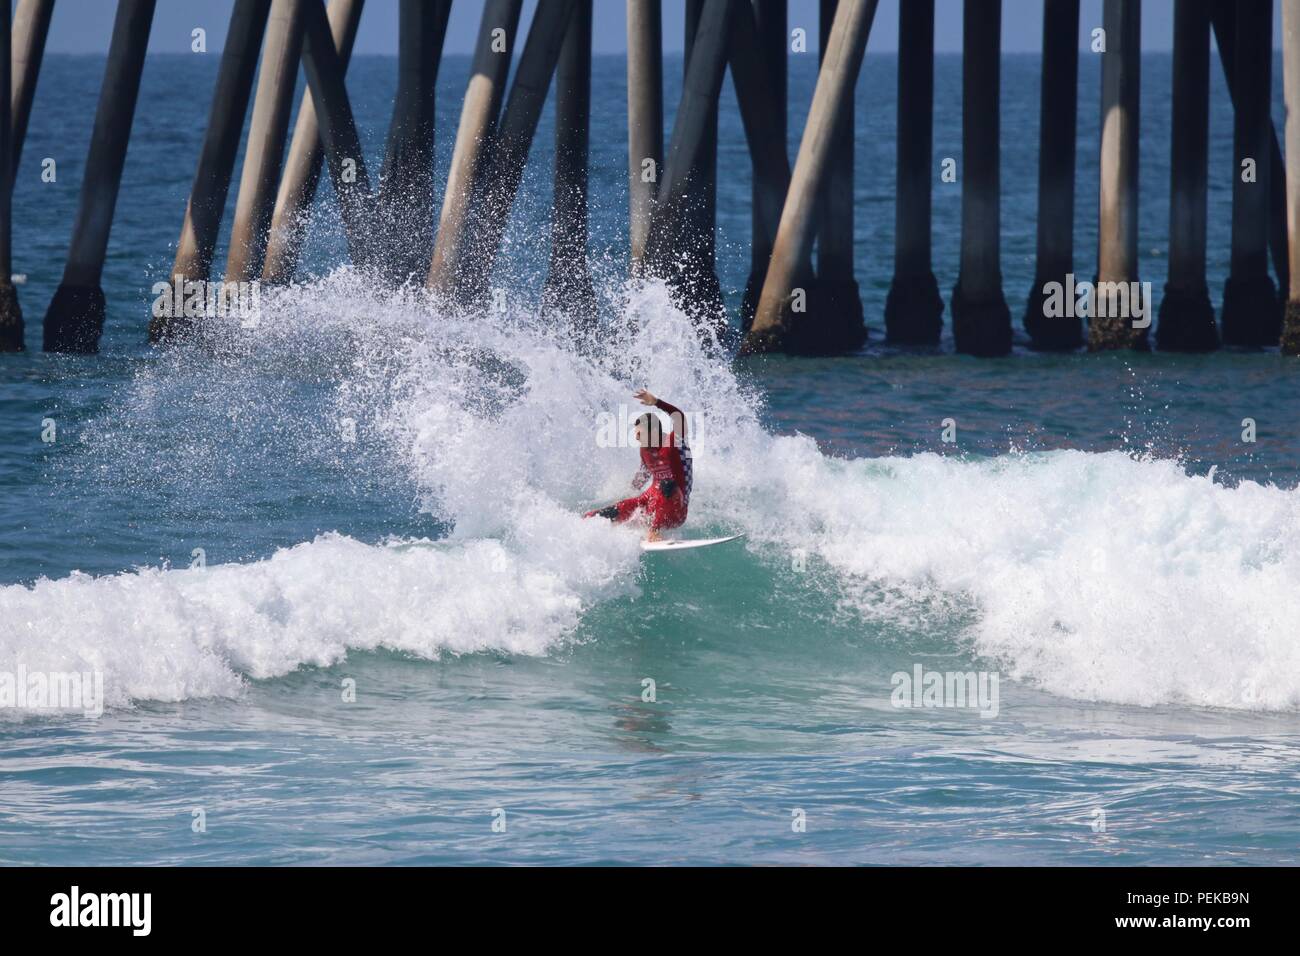 Jorgann Couzinet competing in the US Open of Surfing 2018 Stock Photo